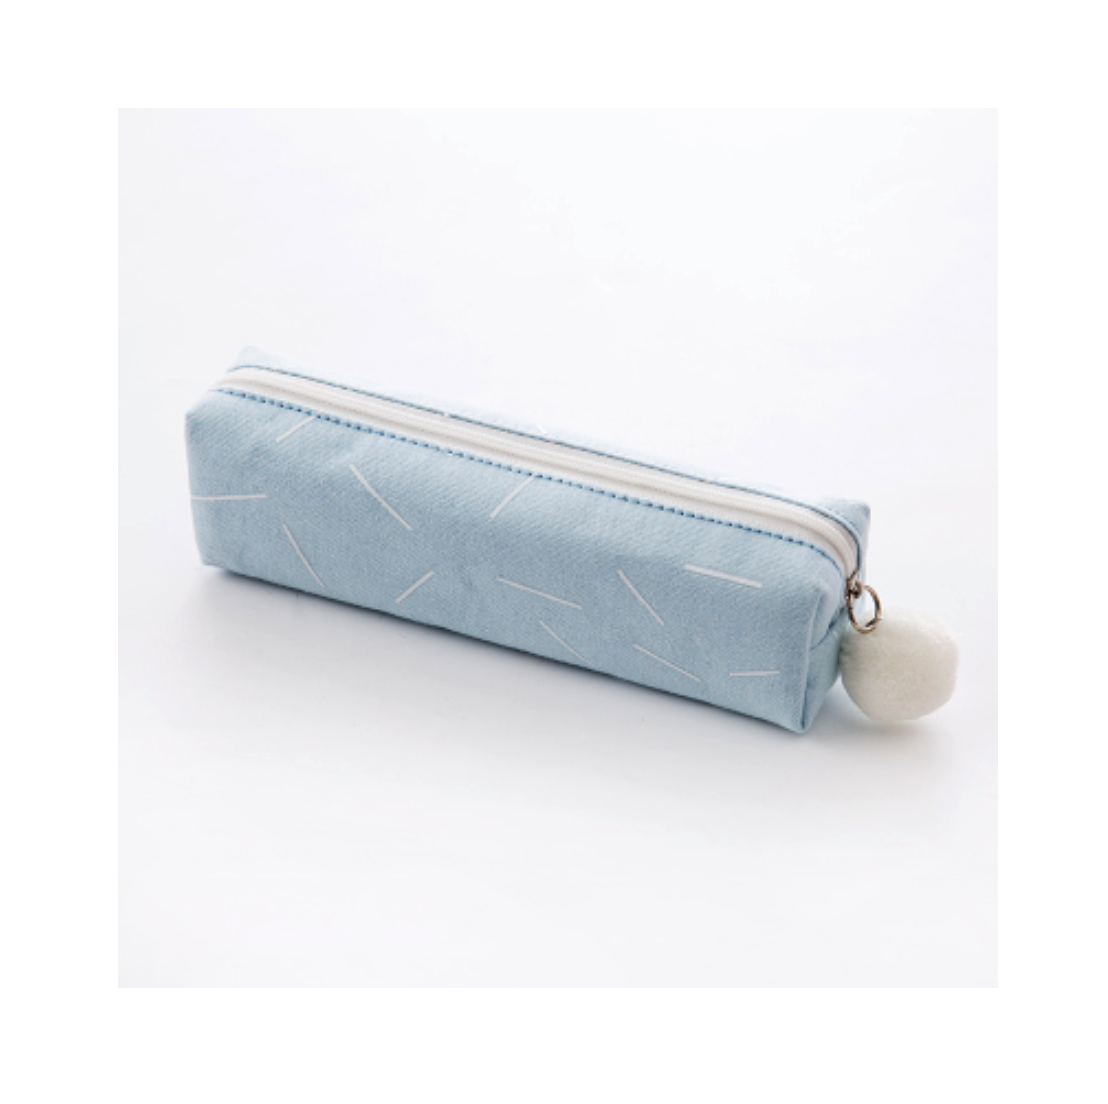 1pc Solid Color Pencil Case, Blue Small Pencil Bag For Students